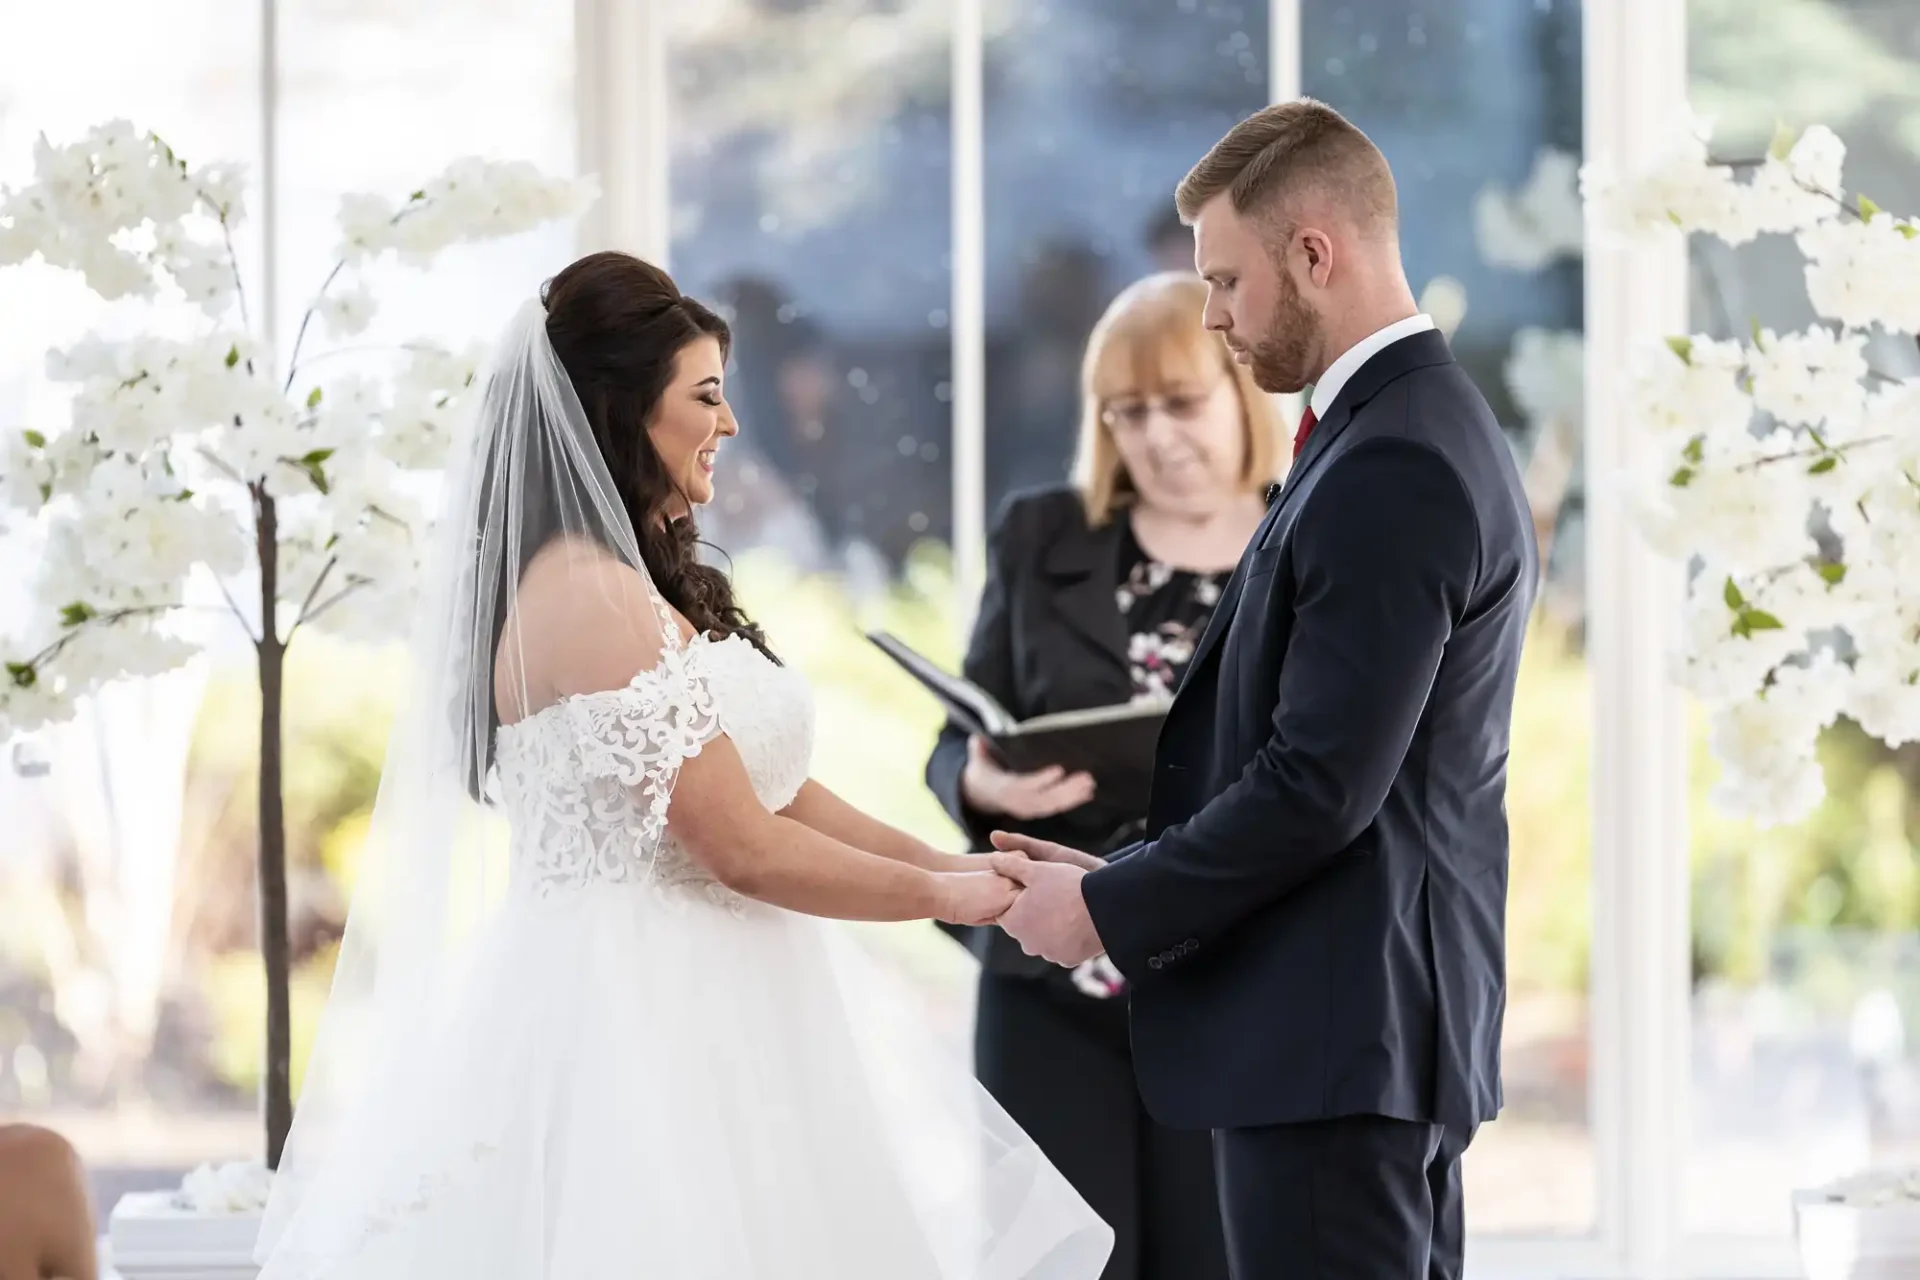 Bride and groom holding hands during a wedding ceremony in a bright room with white floral decorations, officiant in the background.